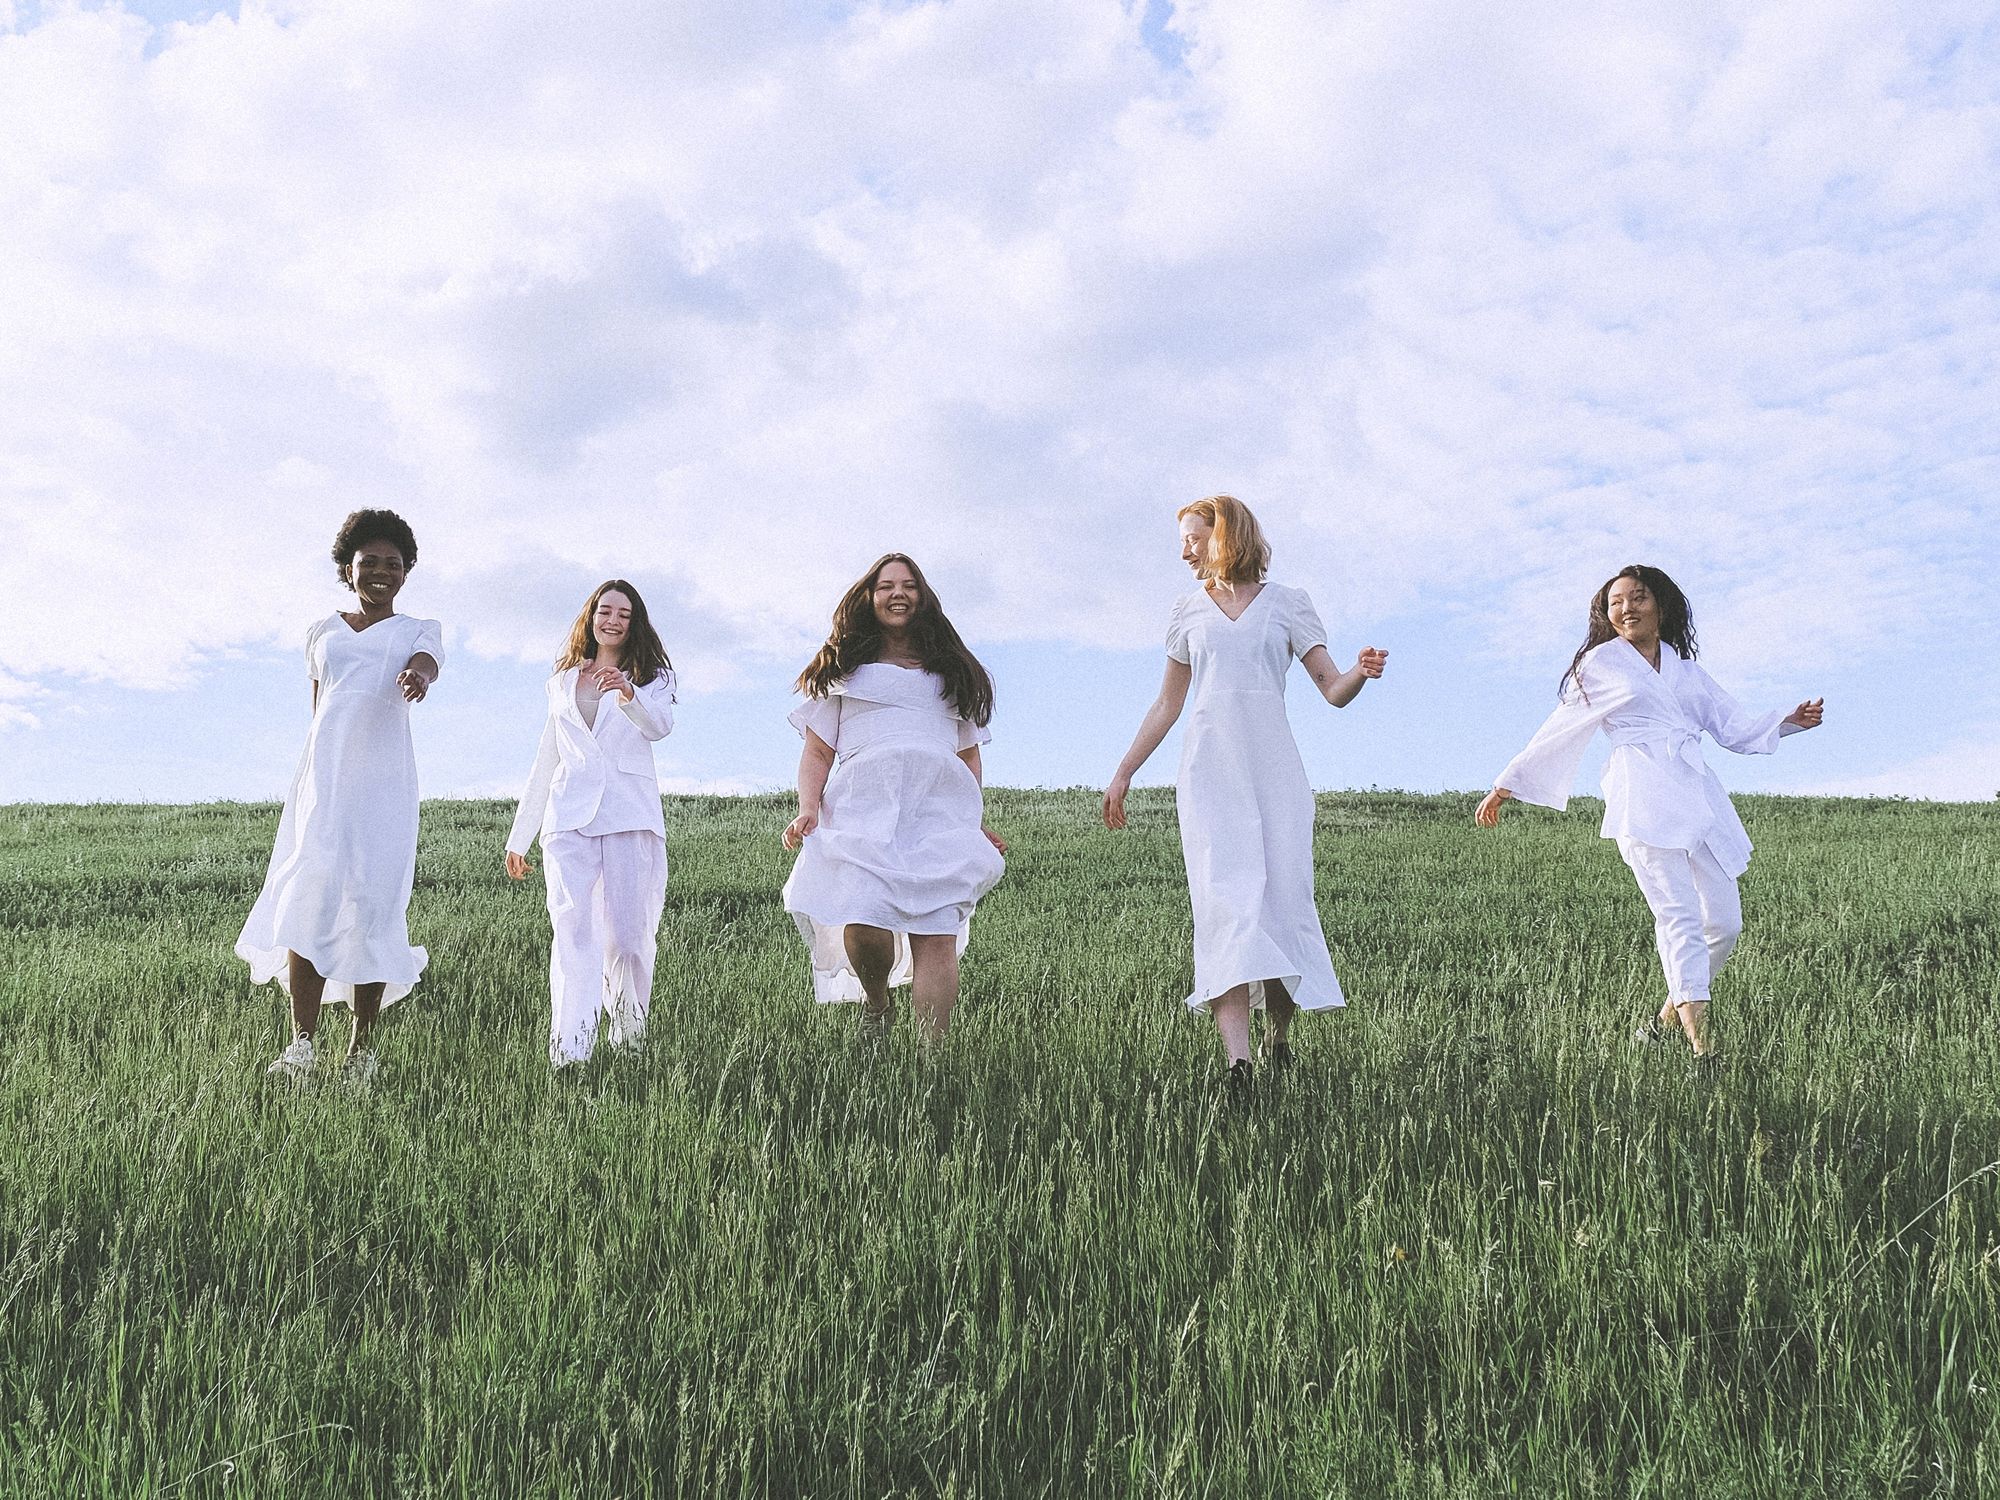 women together in a grass field